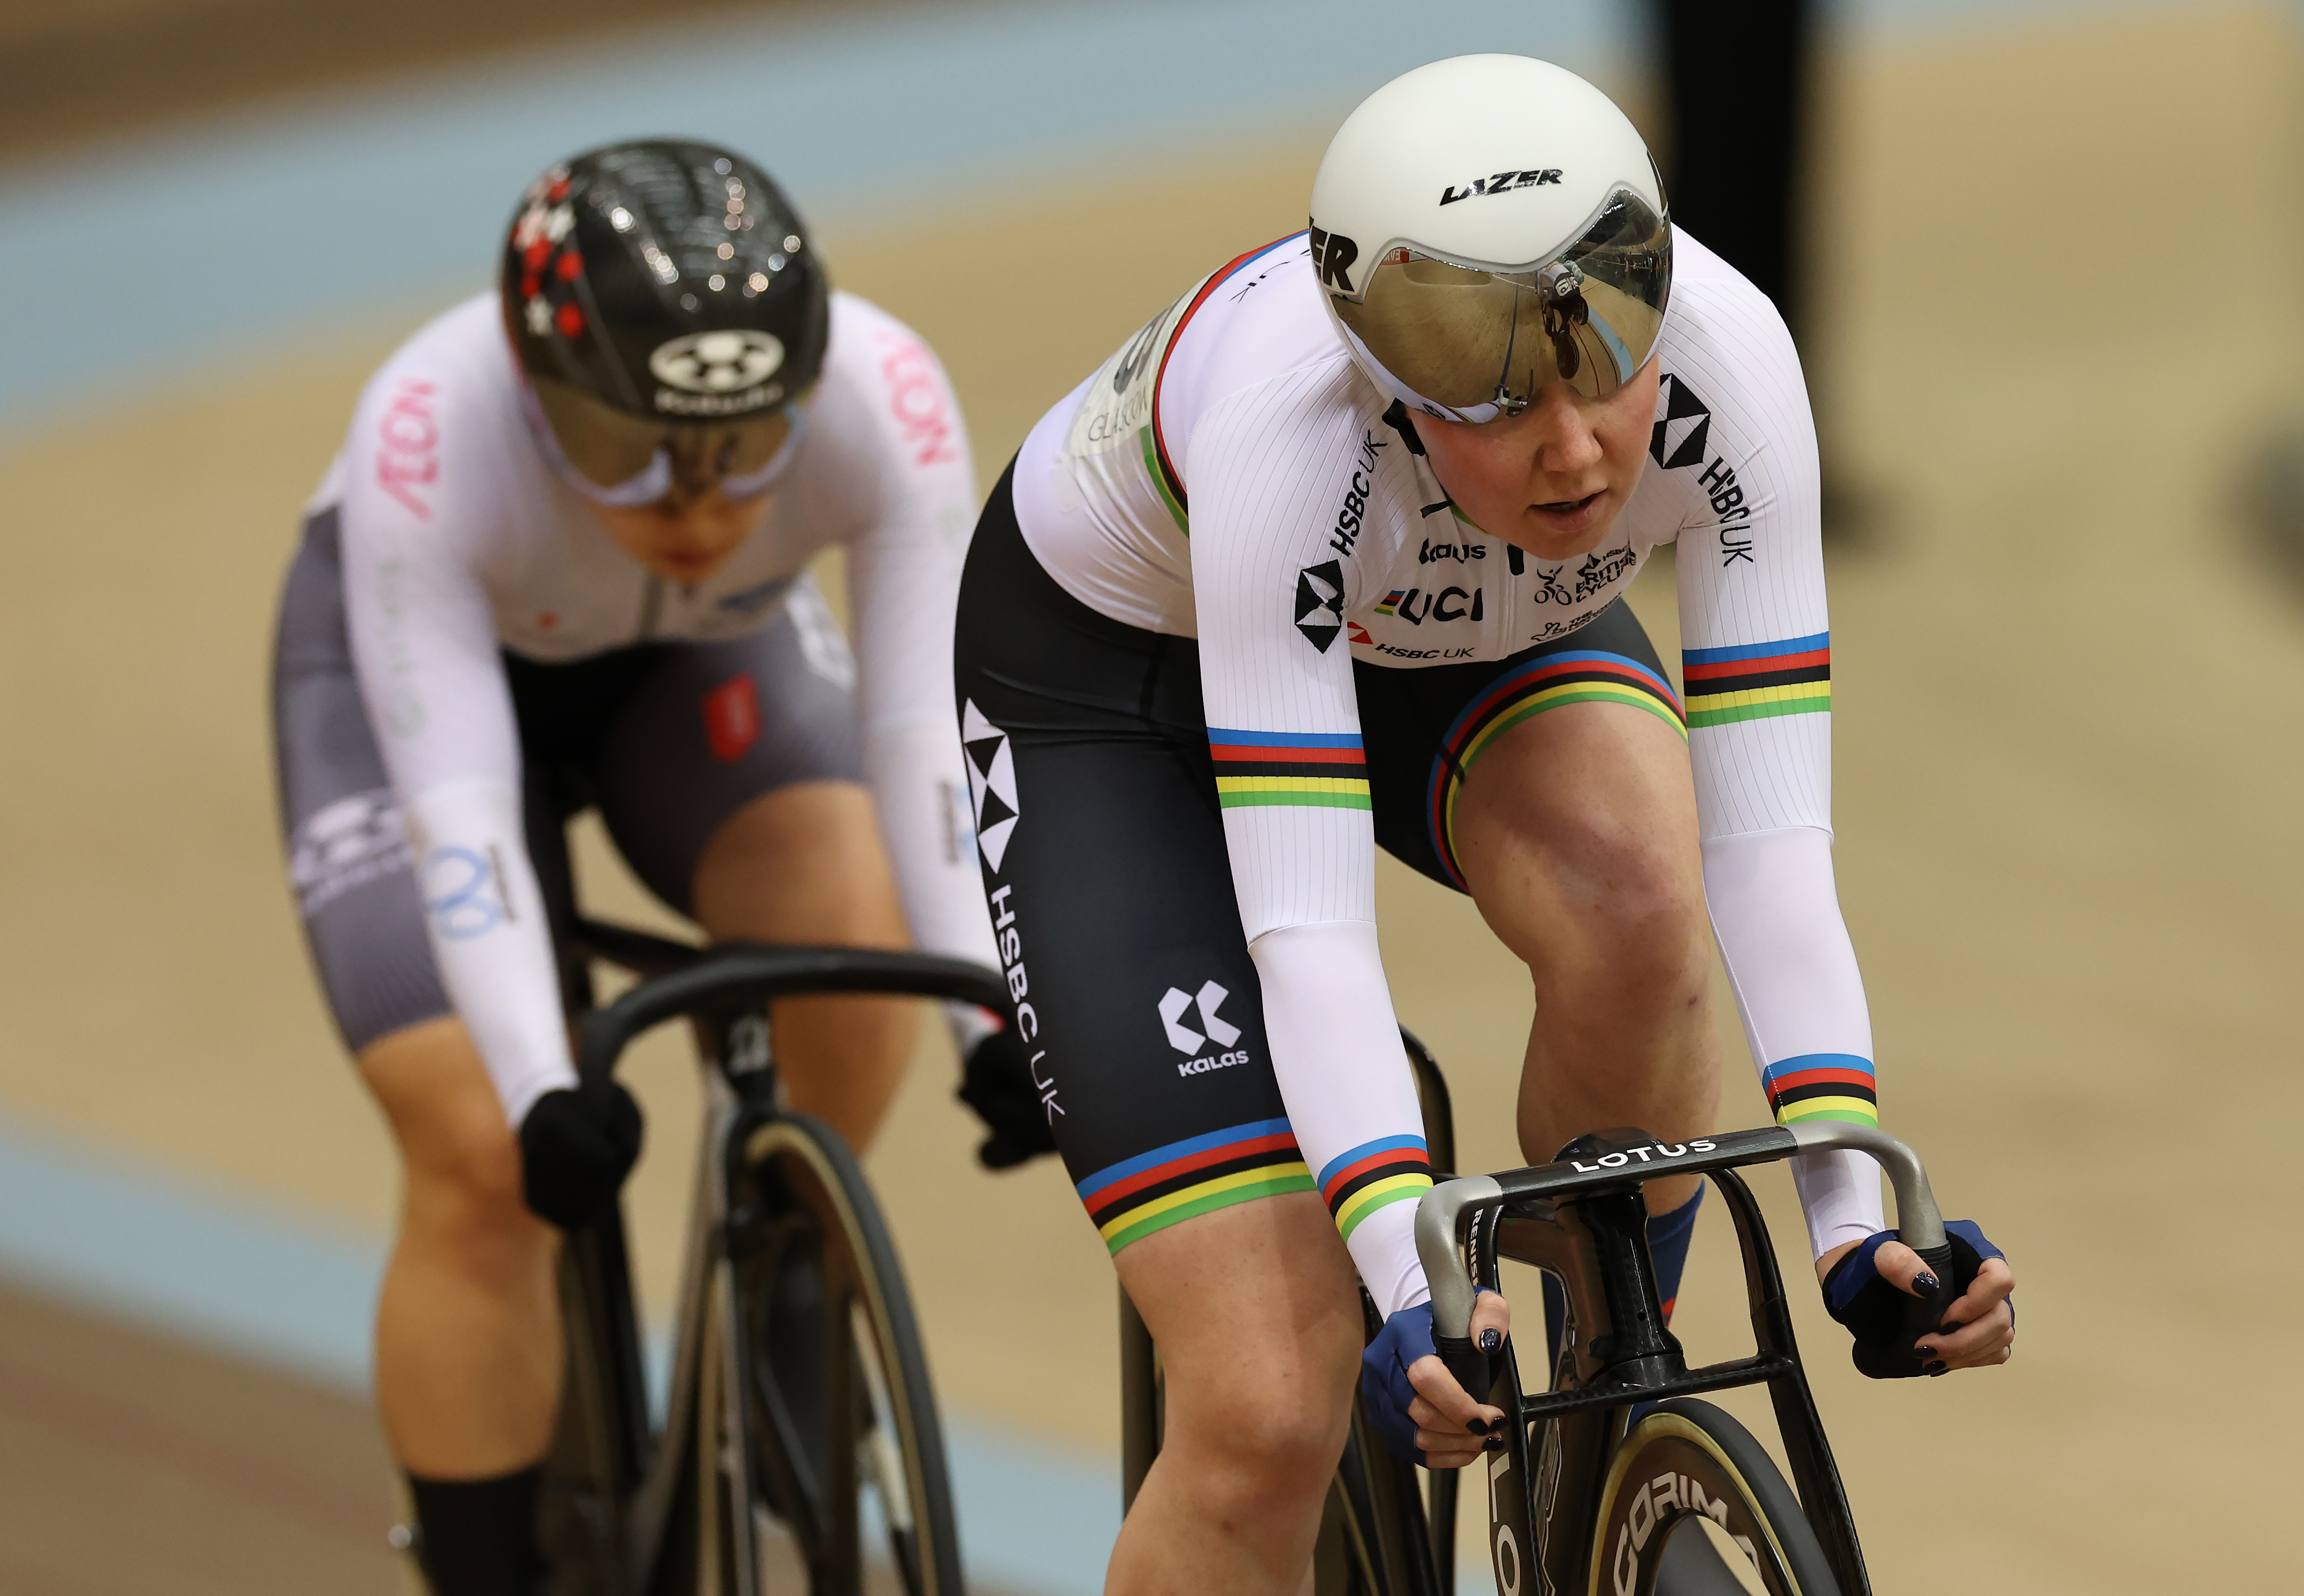 Catch-up Track Cycling World Championships 2022 - Live